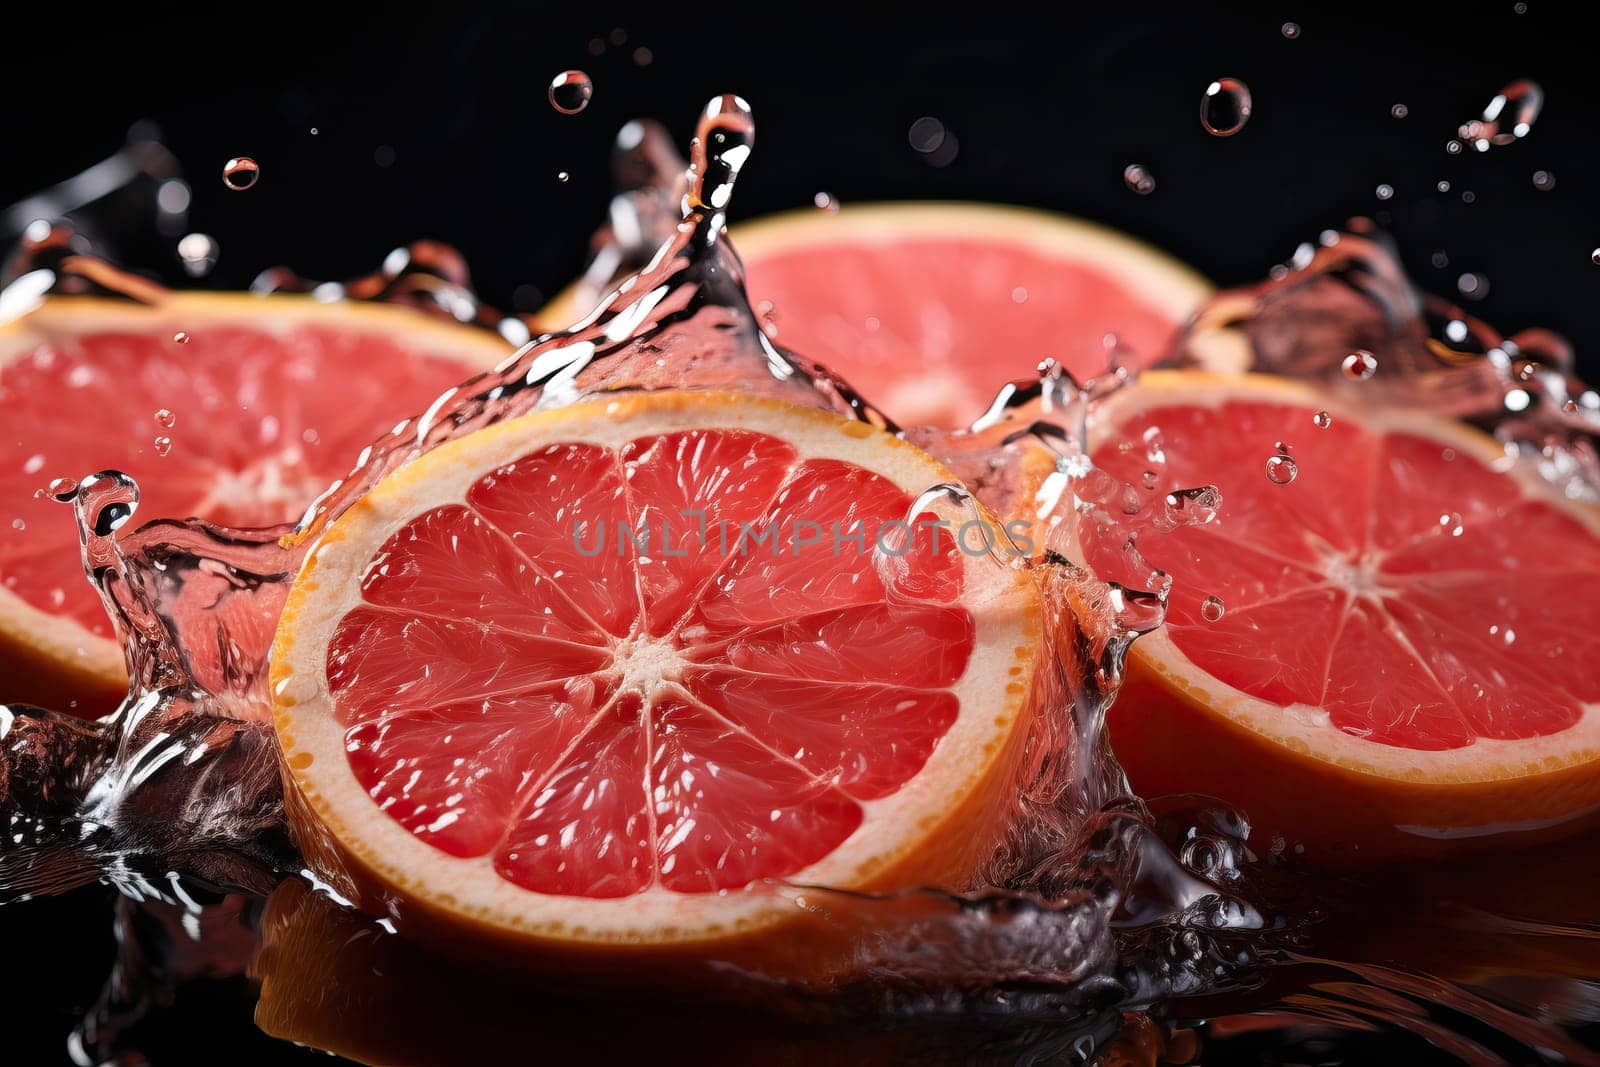 Slices of grapefruit in water with bubbles, splash of water and grapefruit.